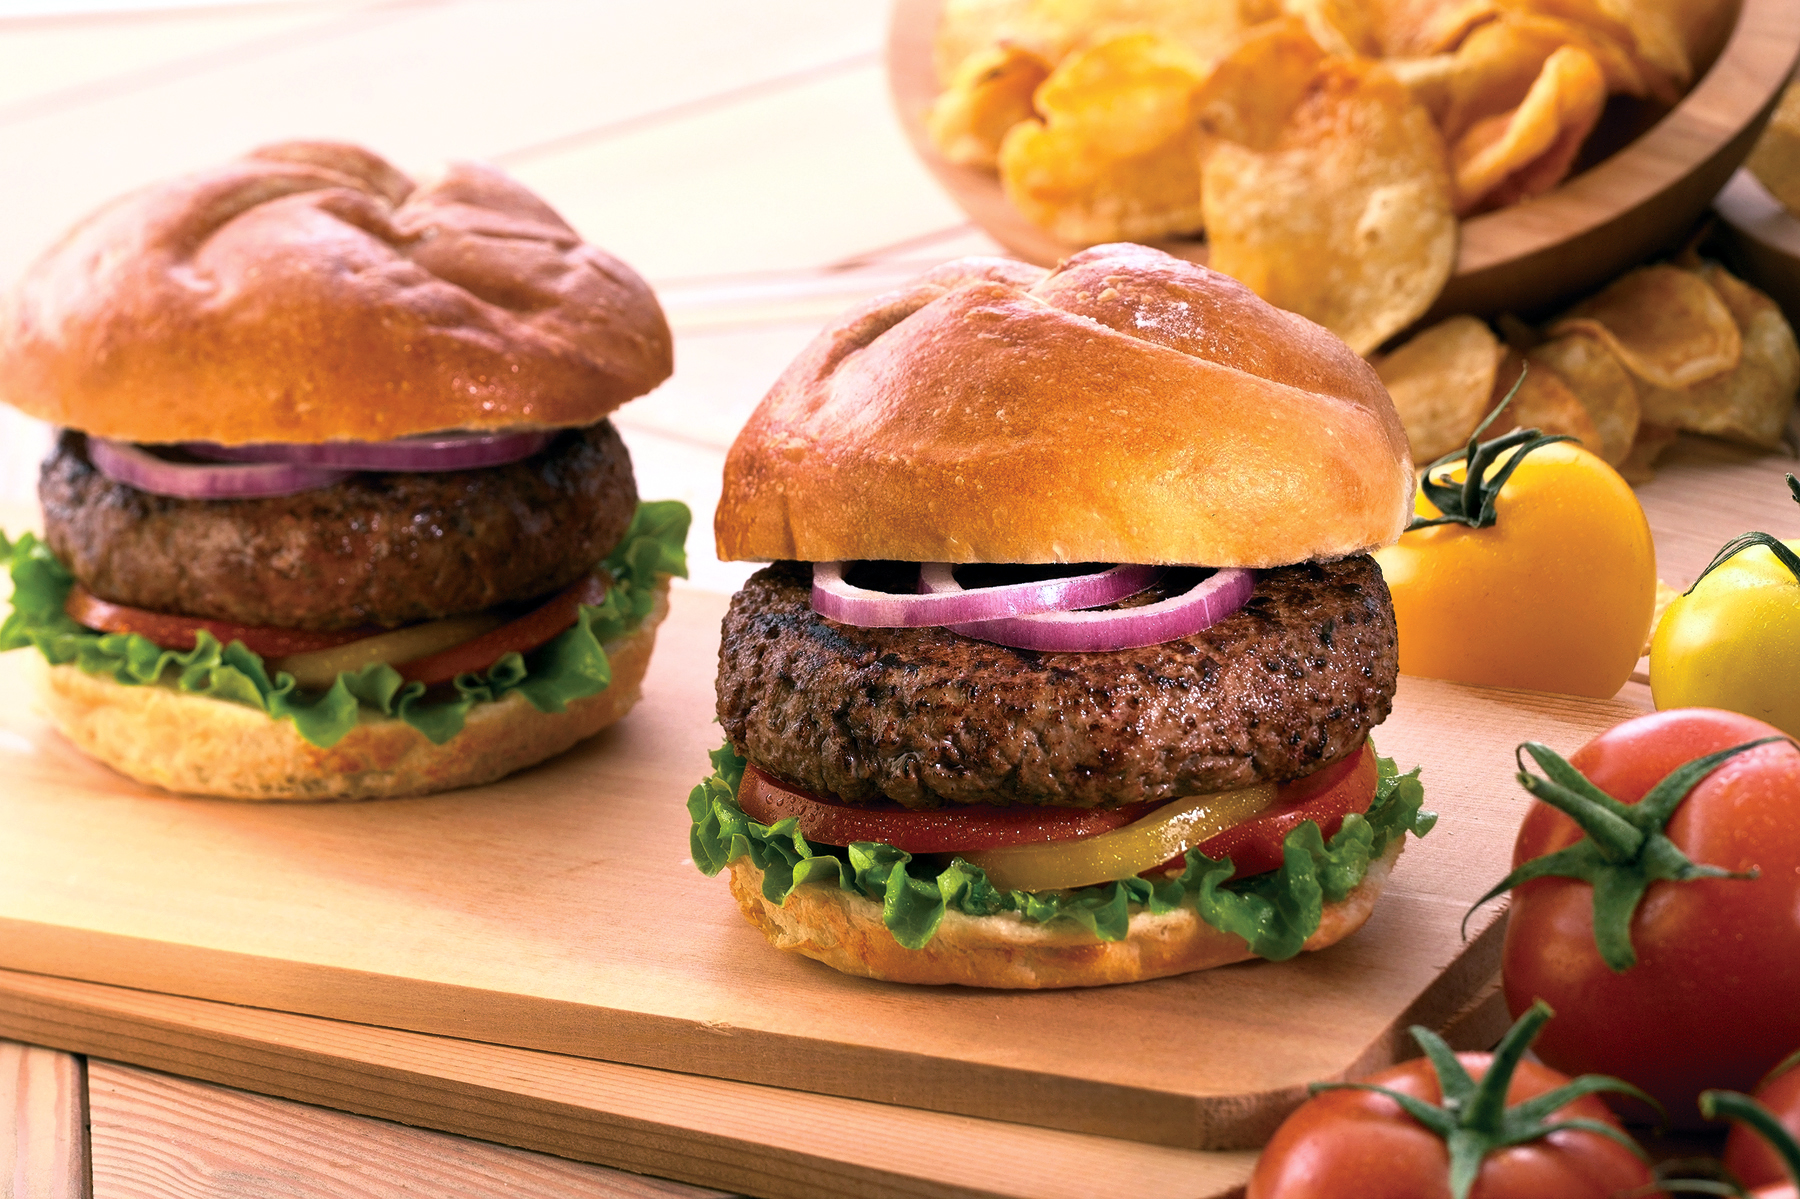 A perfect substitution for hamburger patties, but still considered a burger in our world. This recipe for All-American Lamb Burgers combines the flavors of fresh ground lamb, balsamic vinegar, garlic, and herbs and spices, resulting in a mouthwatering juicy burger that your guests will love.